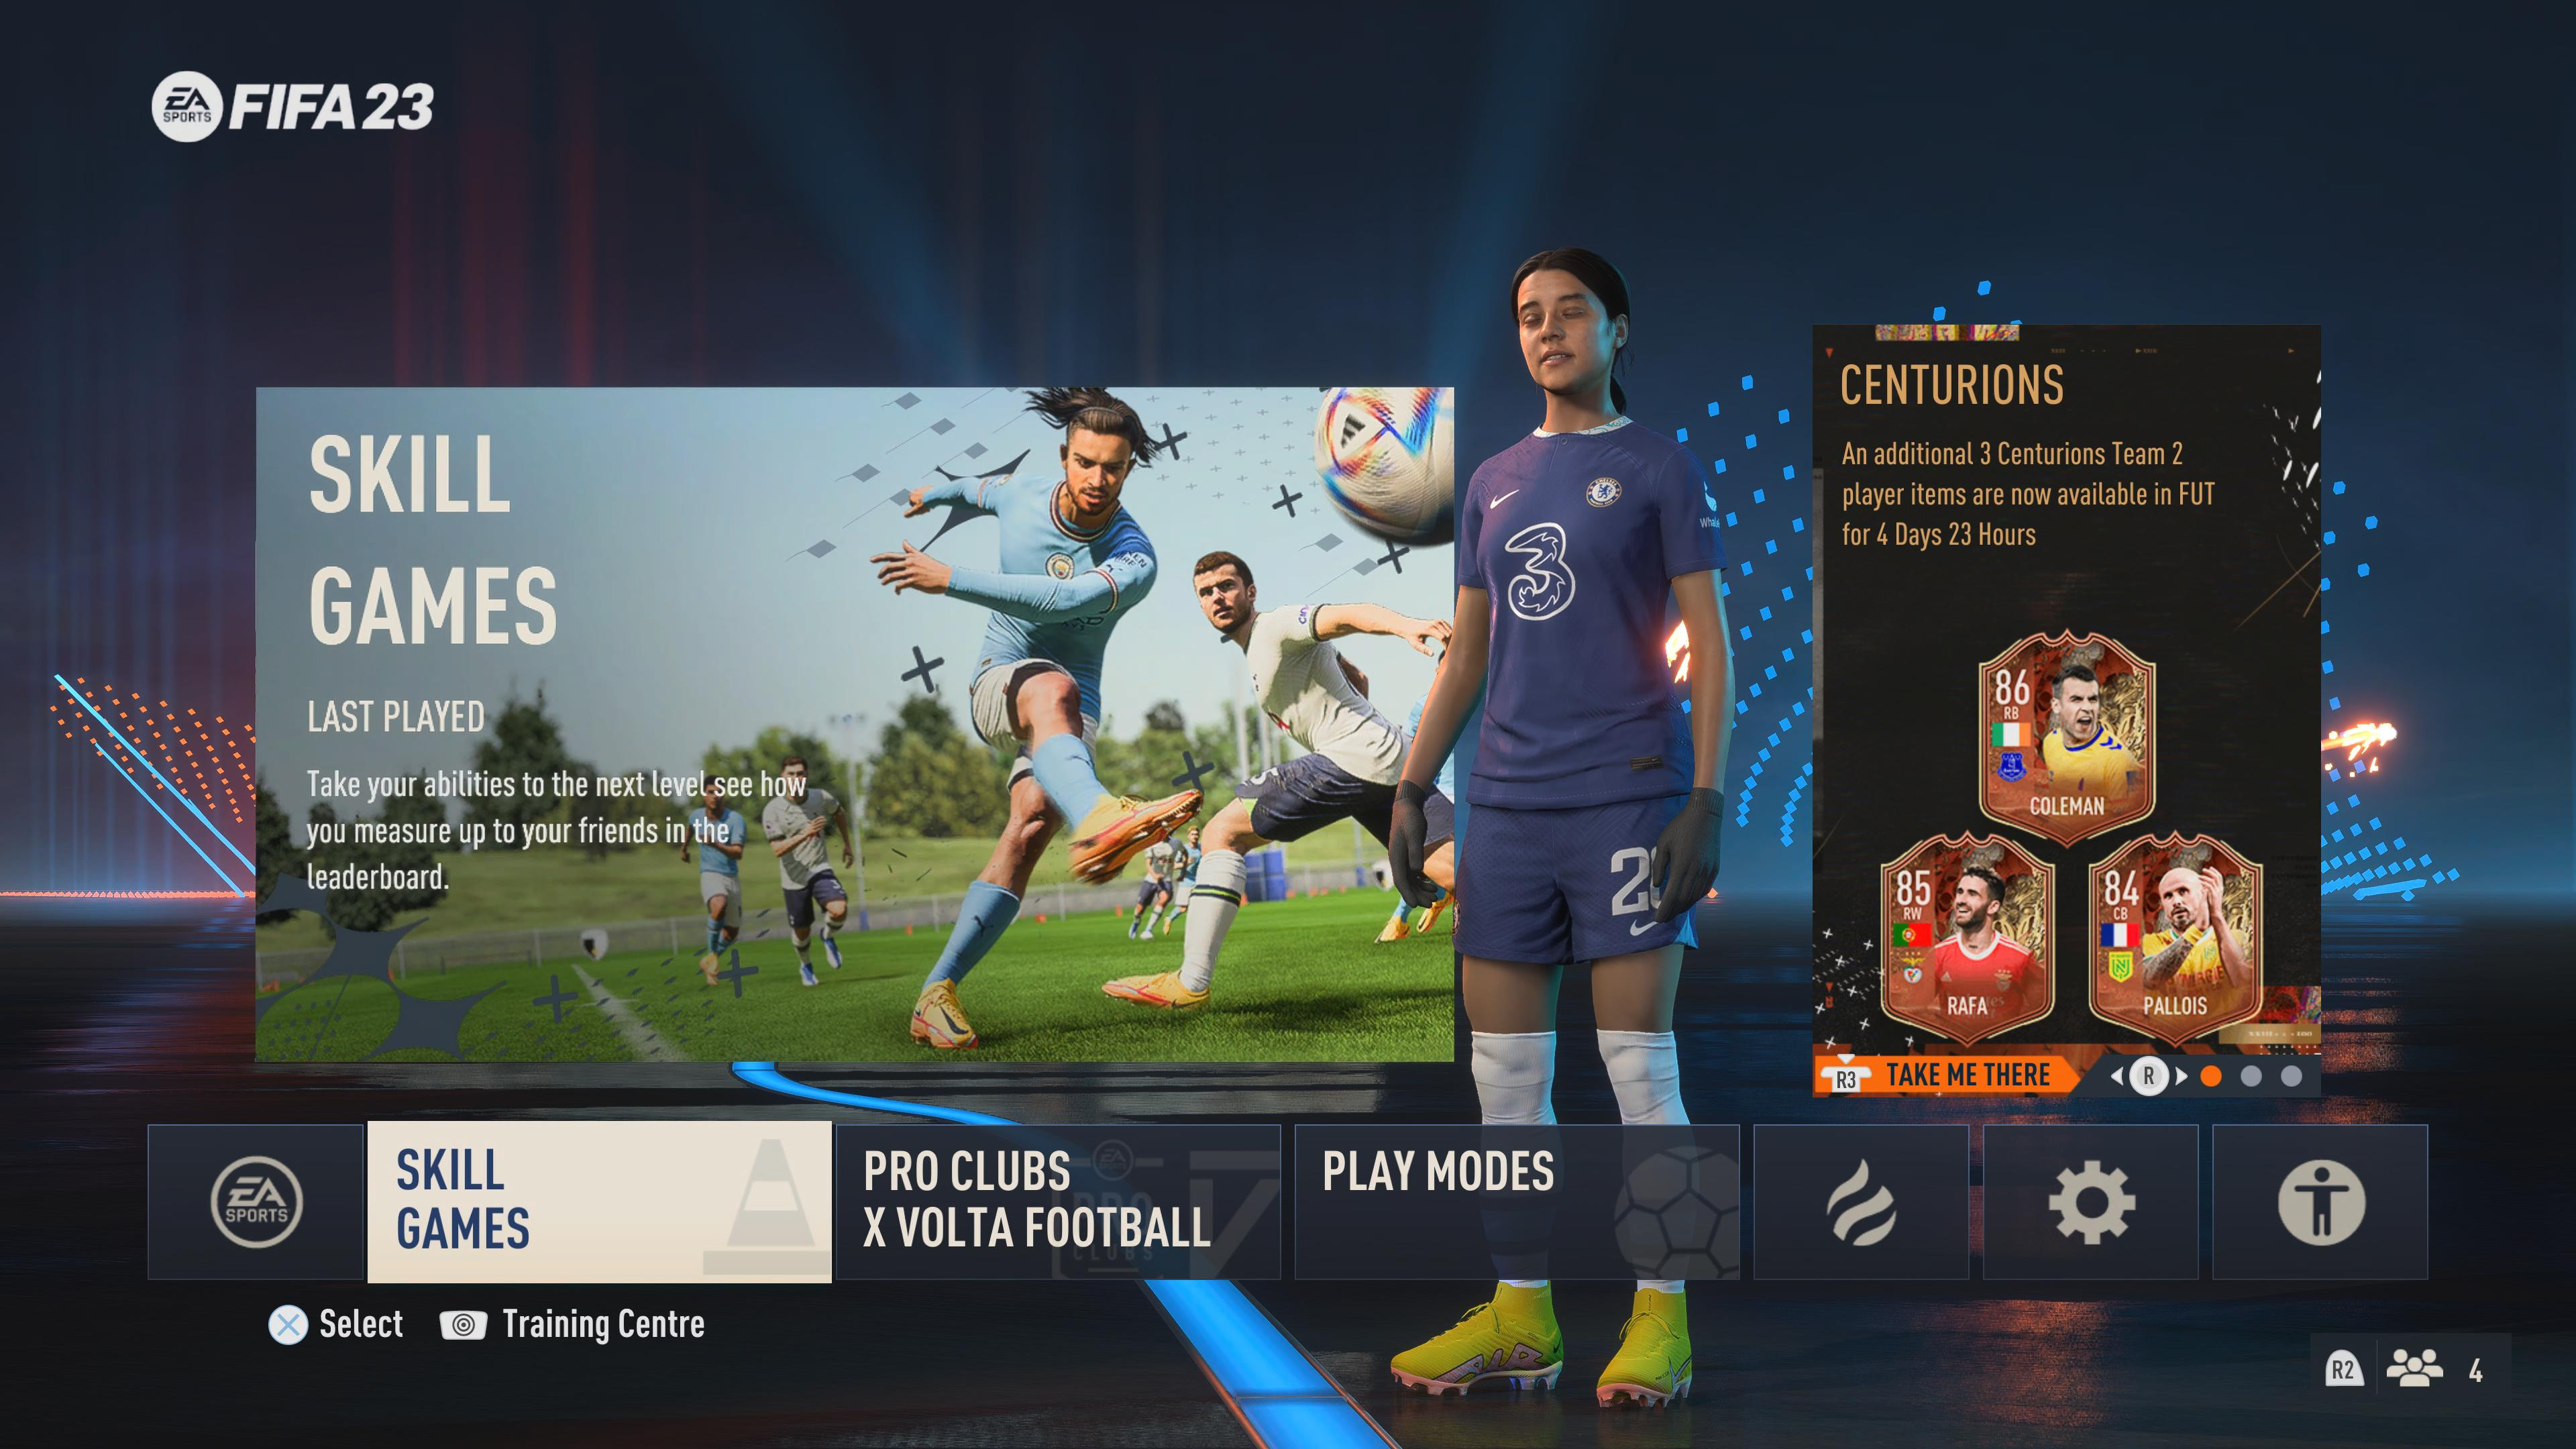 NEW* HOW TO GET FIFA 23 FOR FREE! HOW TO GET FIFA 23 100% FREE